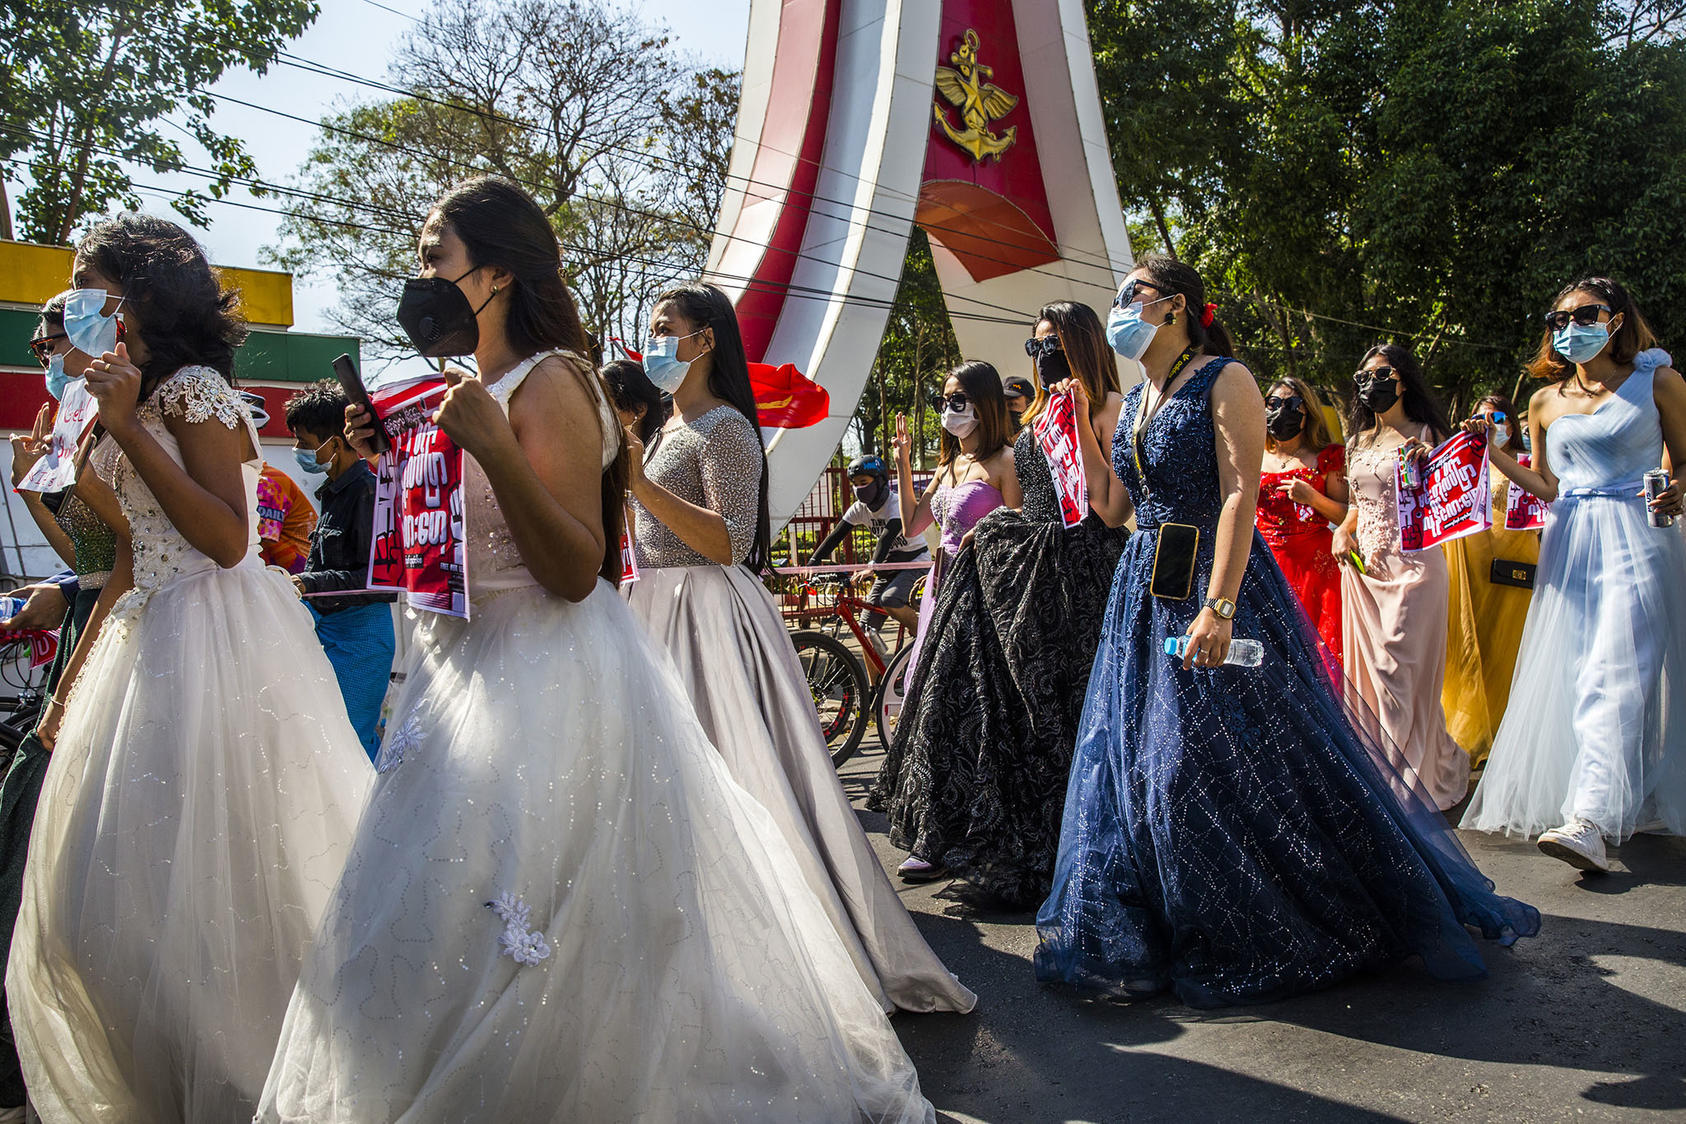 A group of women wearing formal gowns march in Yangon, Myanmar, on Feb. 10, 2021, to protest against the military coup. Despite the danger, women have been at the forefront of the protest movement. (The New York Times)